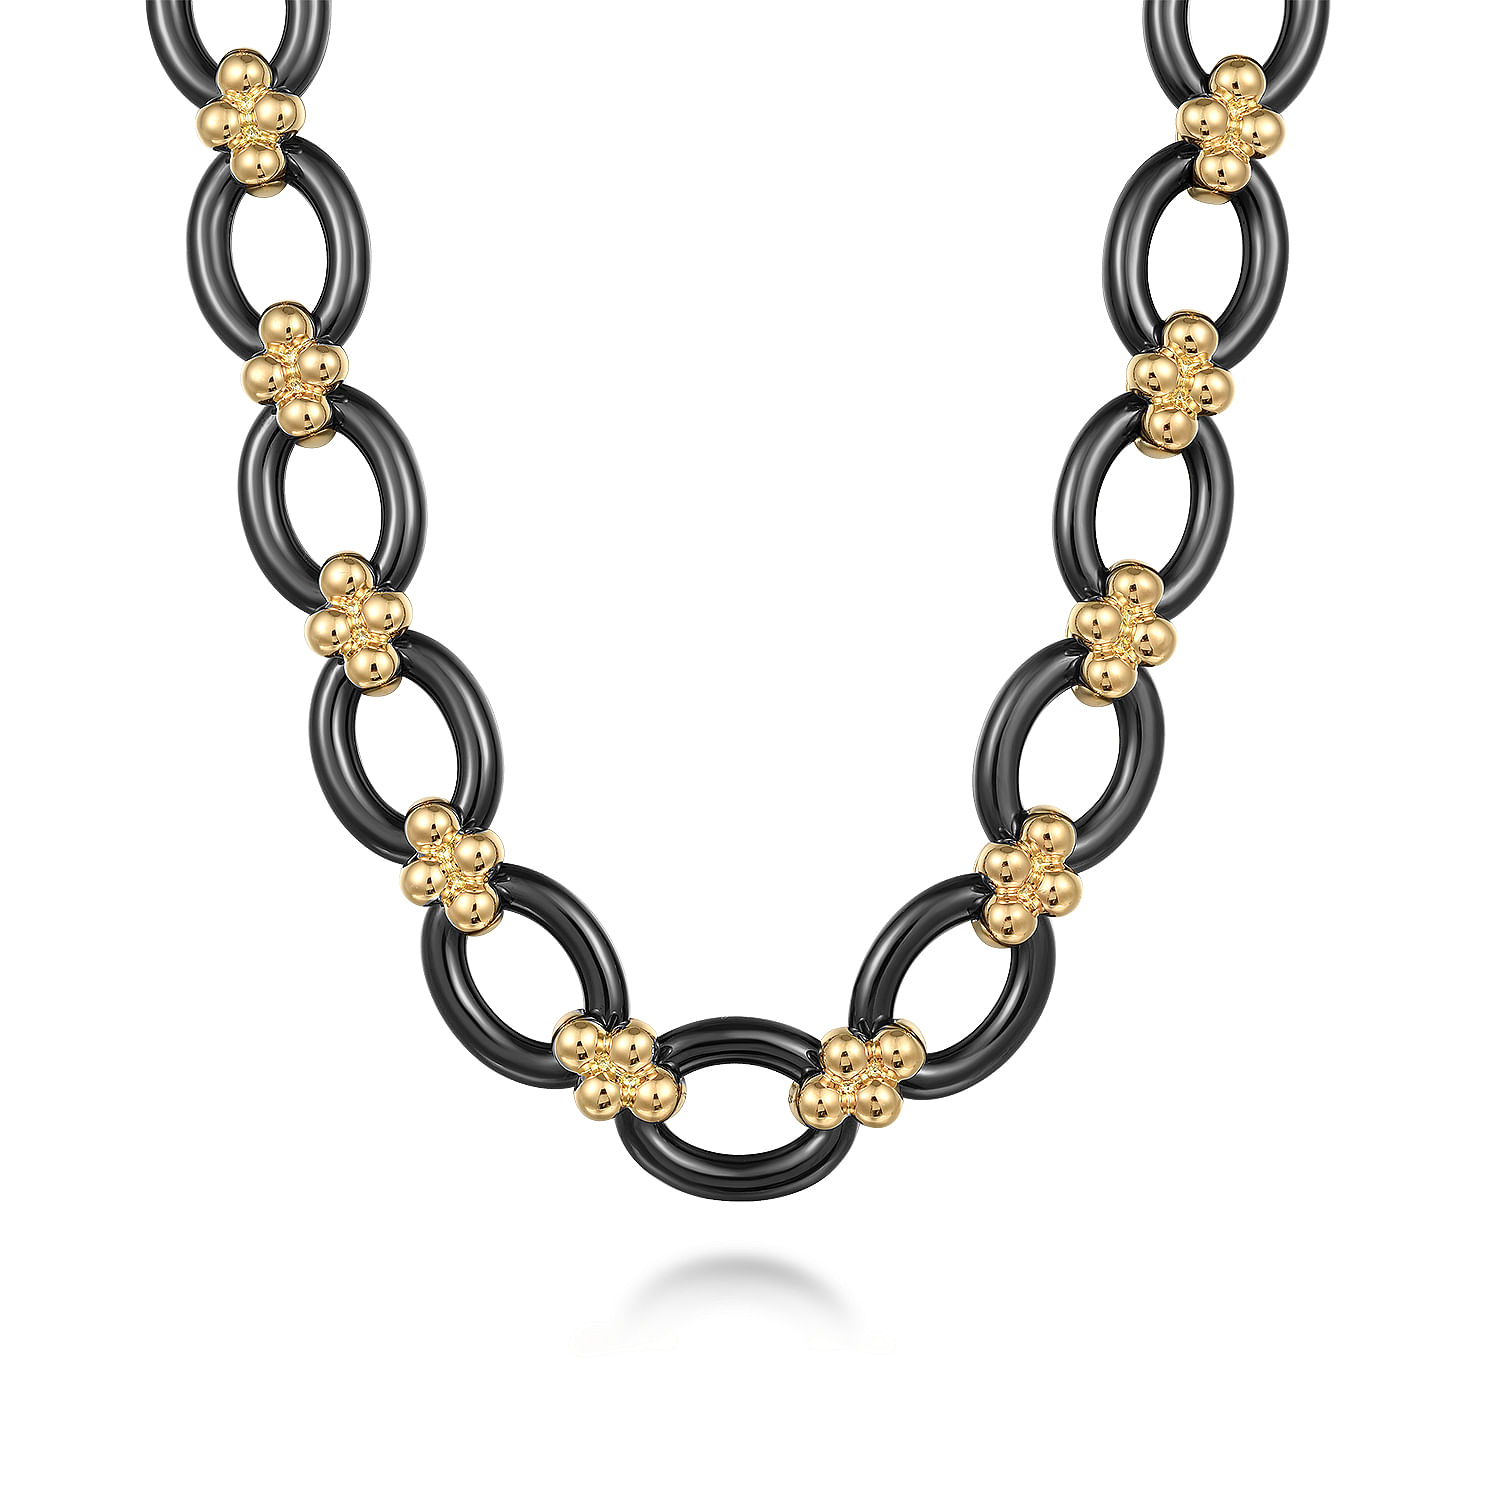 Gabriel - 14K Yellow Gold Black Ceramic Oval Link Chain Necklace with Bujukan Connectors